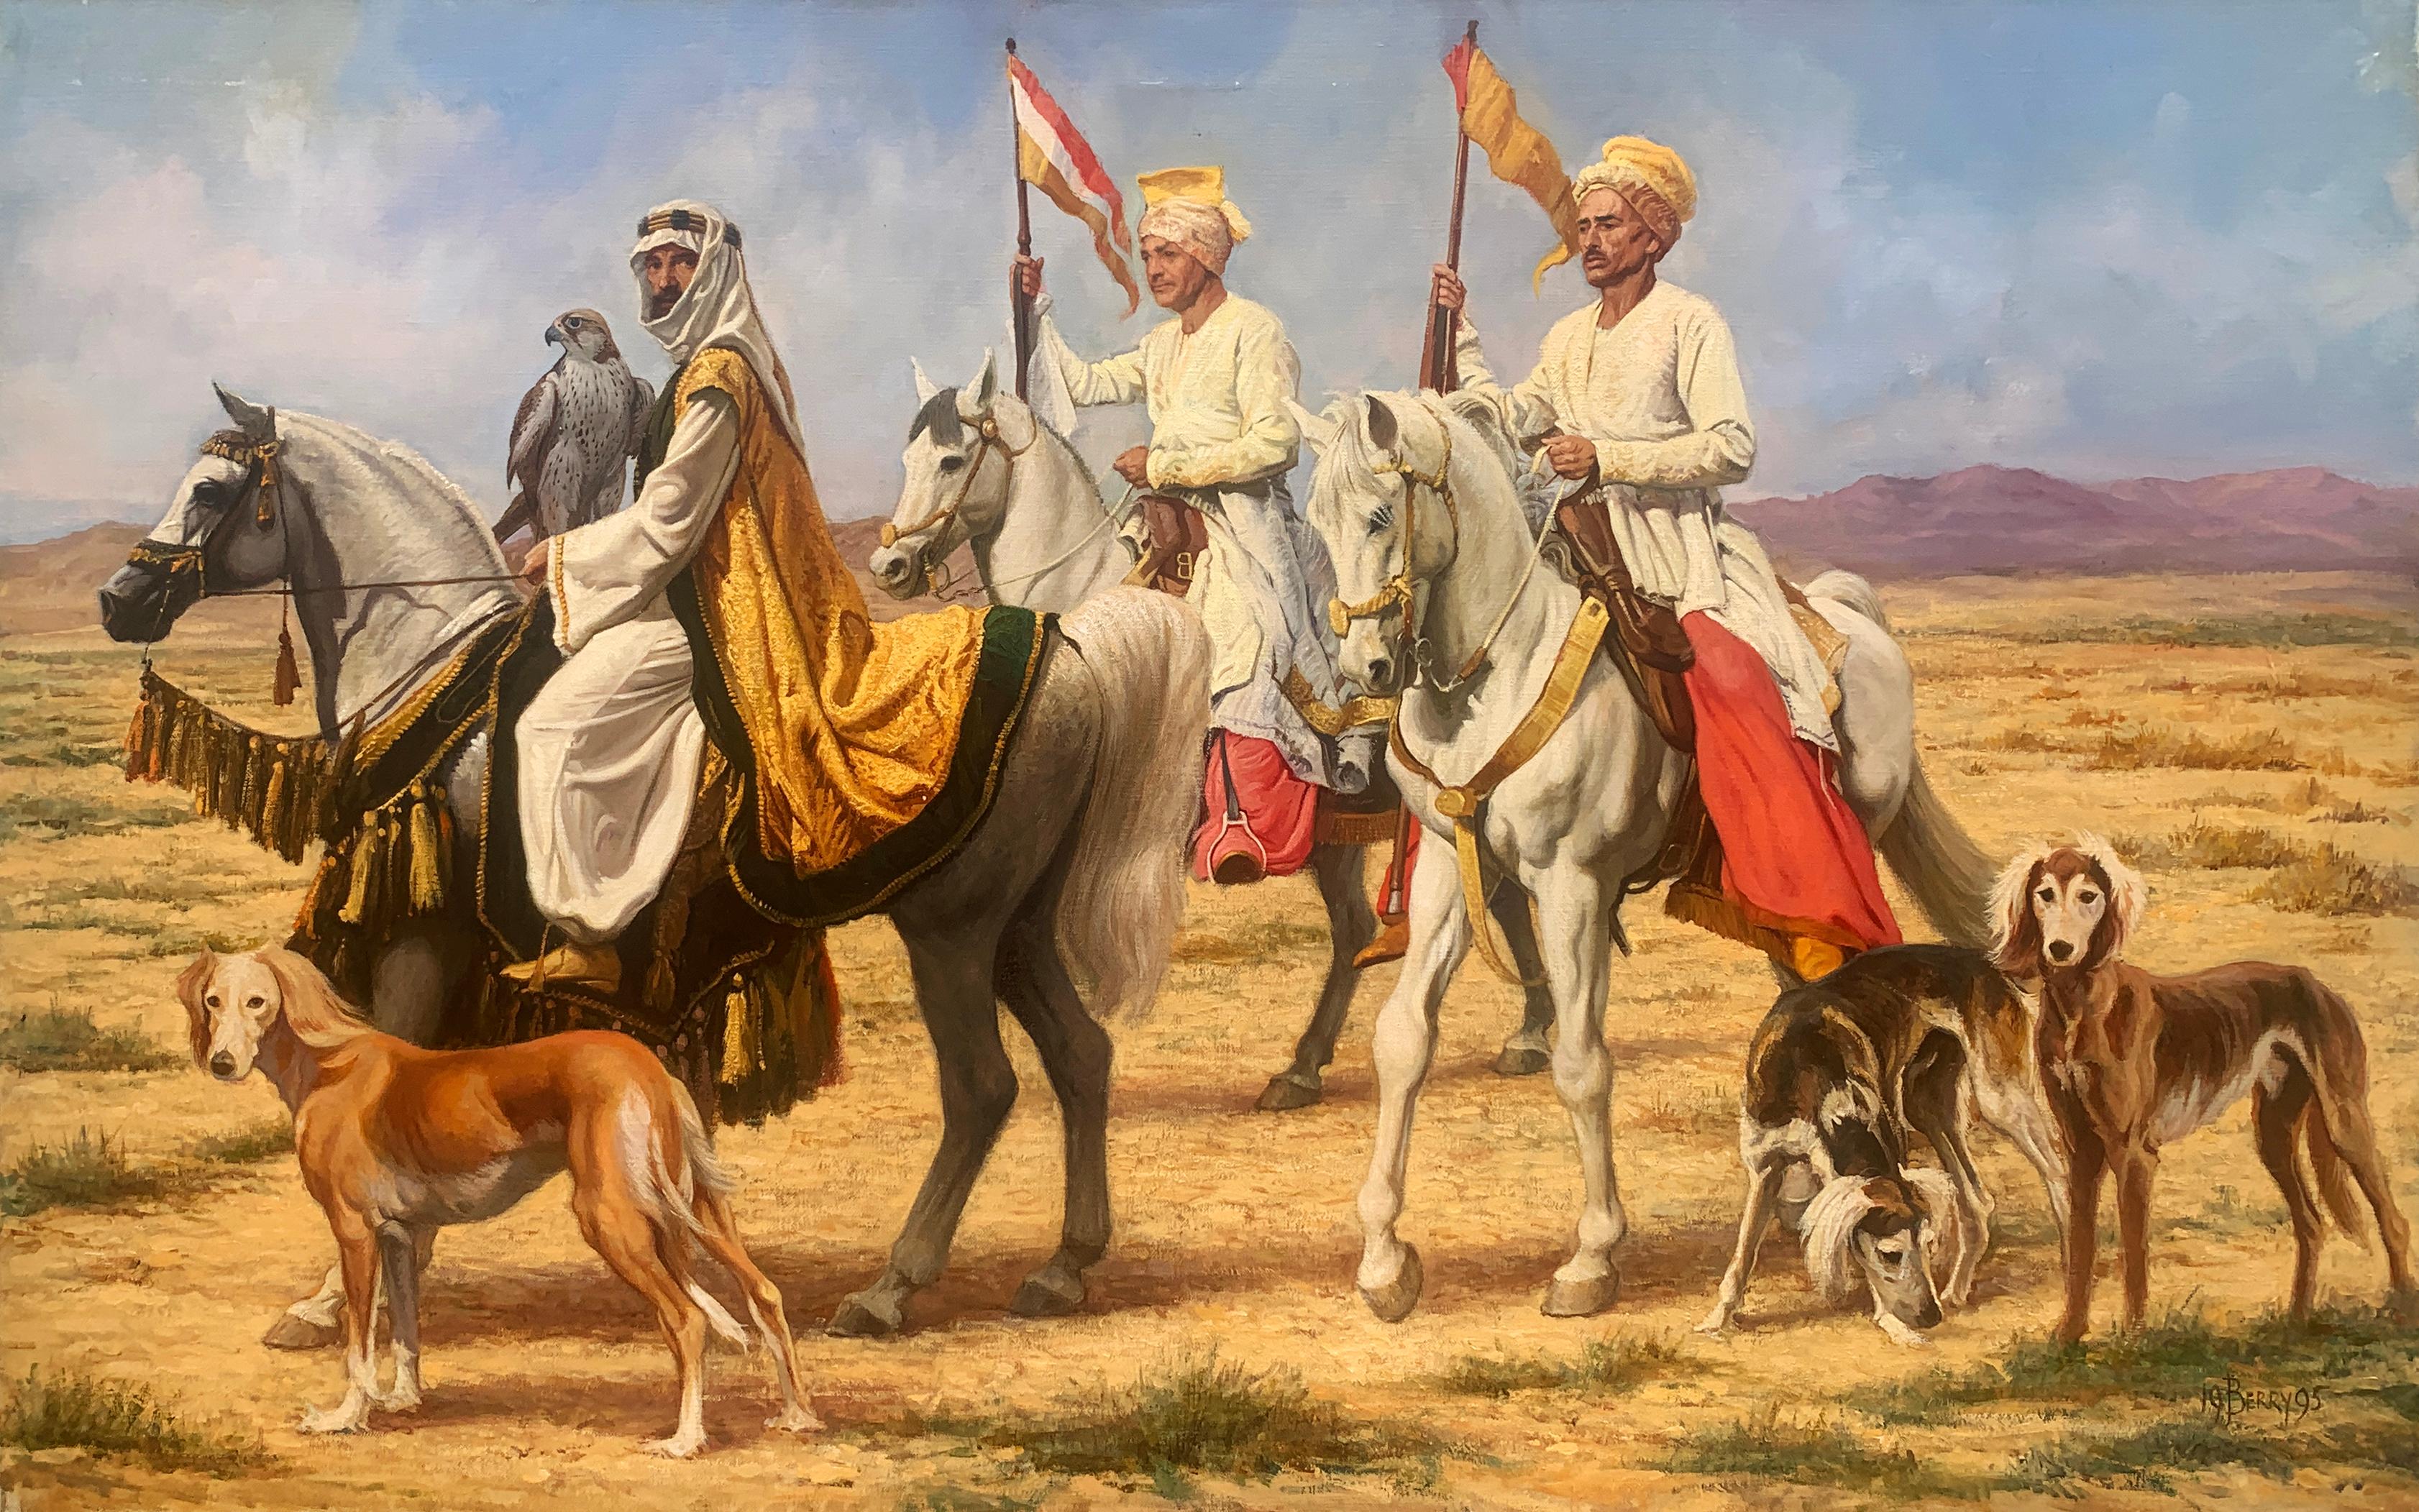 "The Falconer", John Berry, Oil on Canvas, 27x40 in., Horse, Dog, Falcons